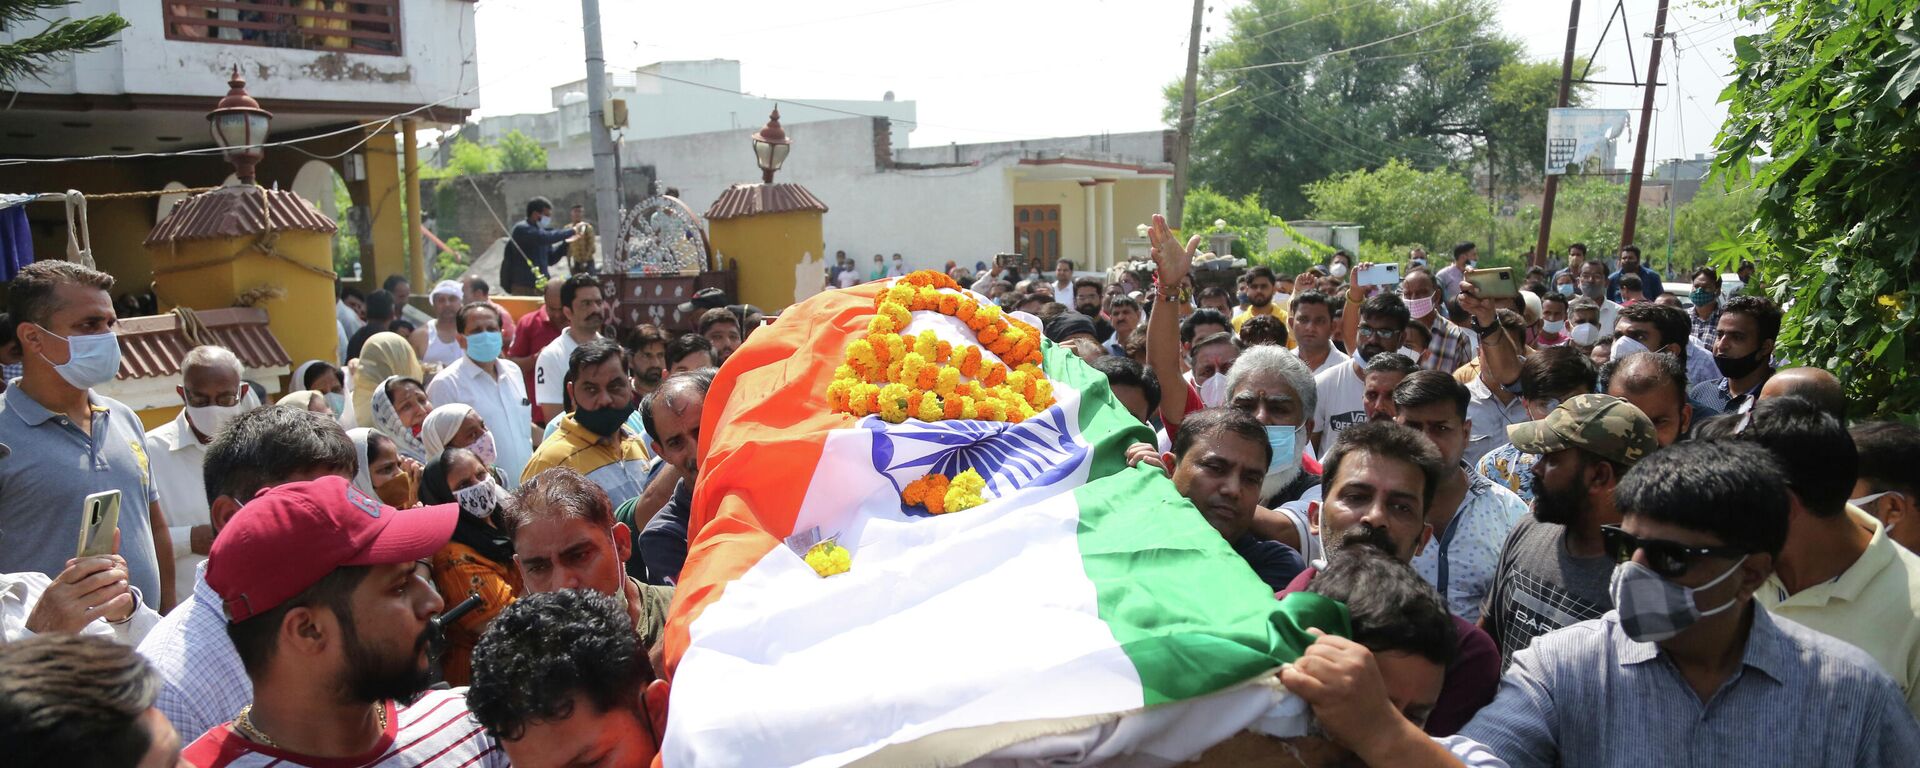 Relatives and friends of Deepak chand, a school teacher who was killed in Kashmir, take his body for cremation in Jammu, India, Friday, Oct.8, 2021 - Sputnik International, 1920, 19.10.2021